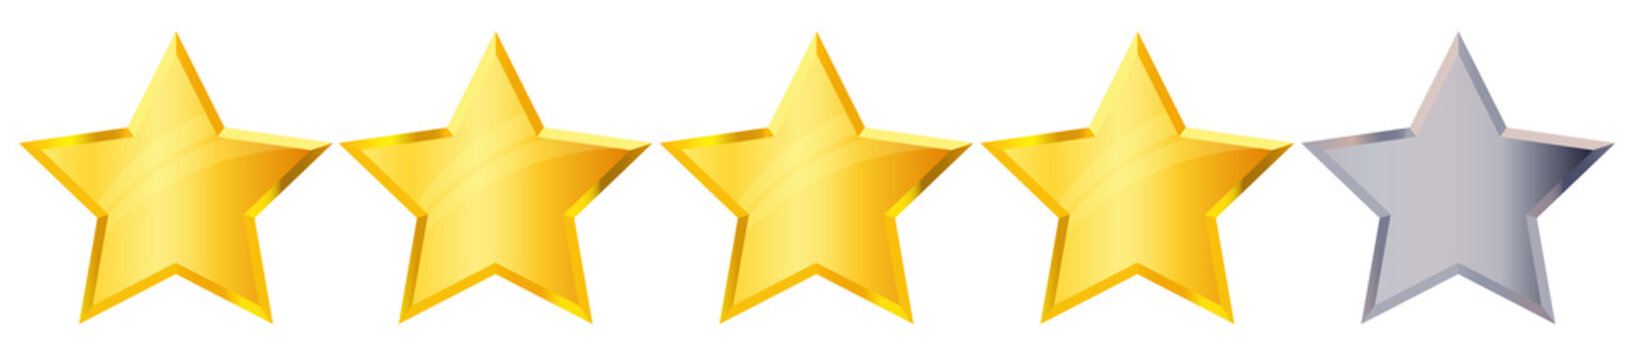 Four 4 star rank sign. Glossy golden star sticker icon rating isolated on black background. 3d four gold stars and grey star with lens flare and shine. Service rating, achievement symbol. JPG